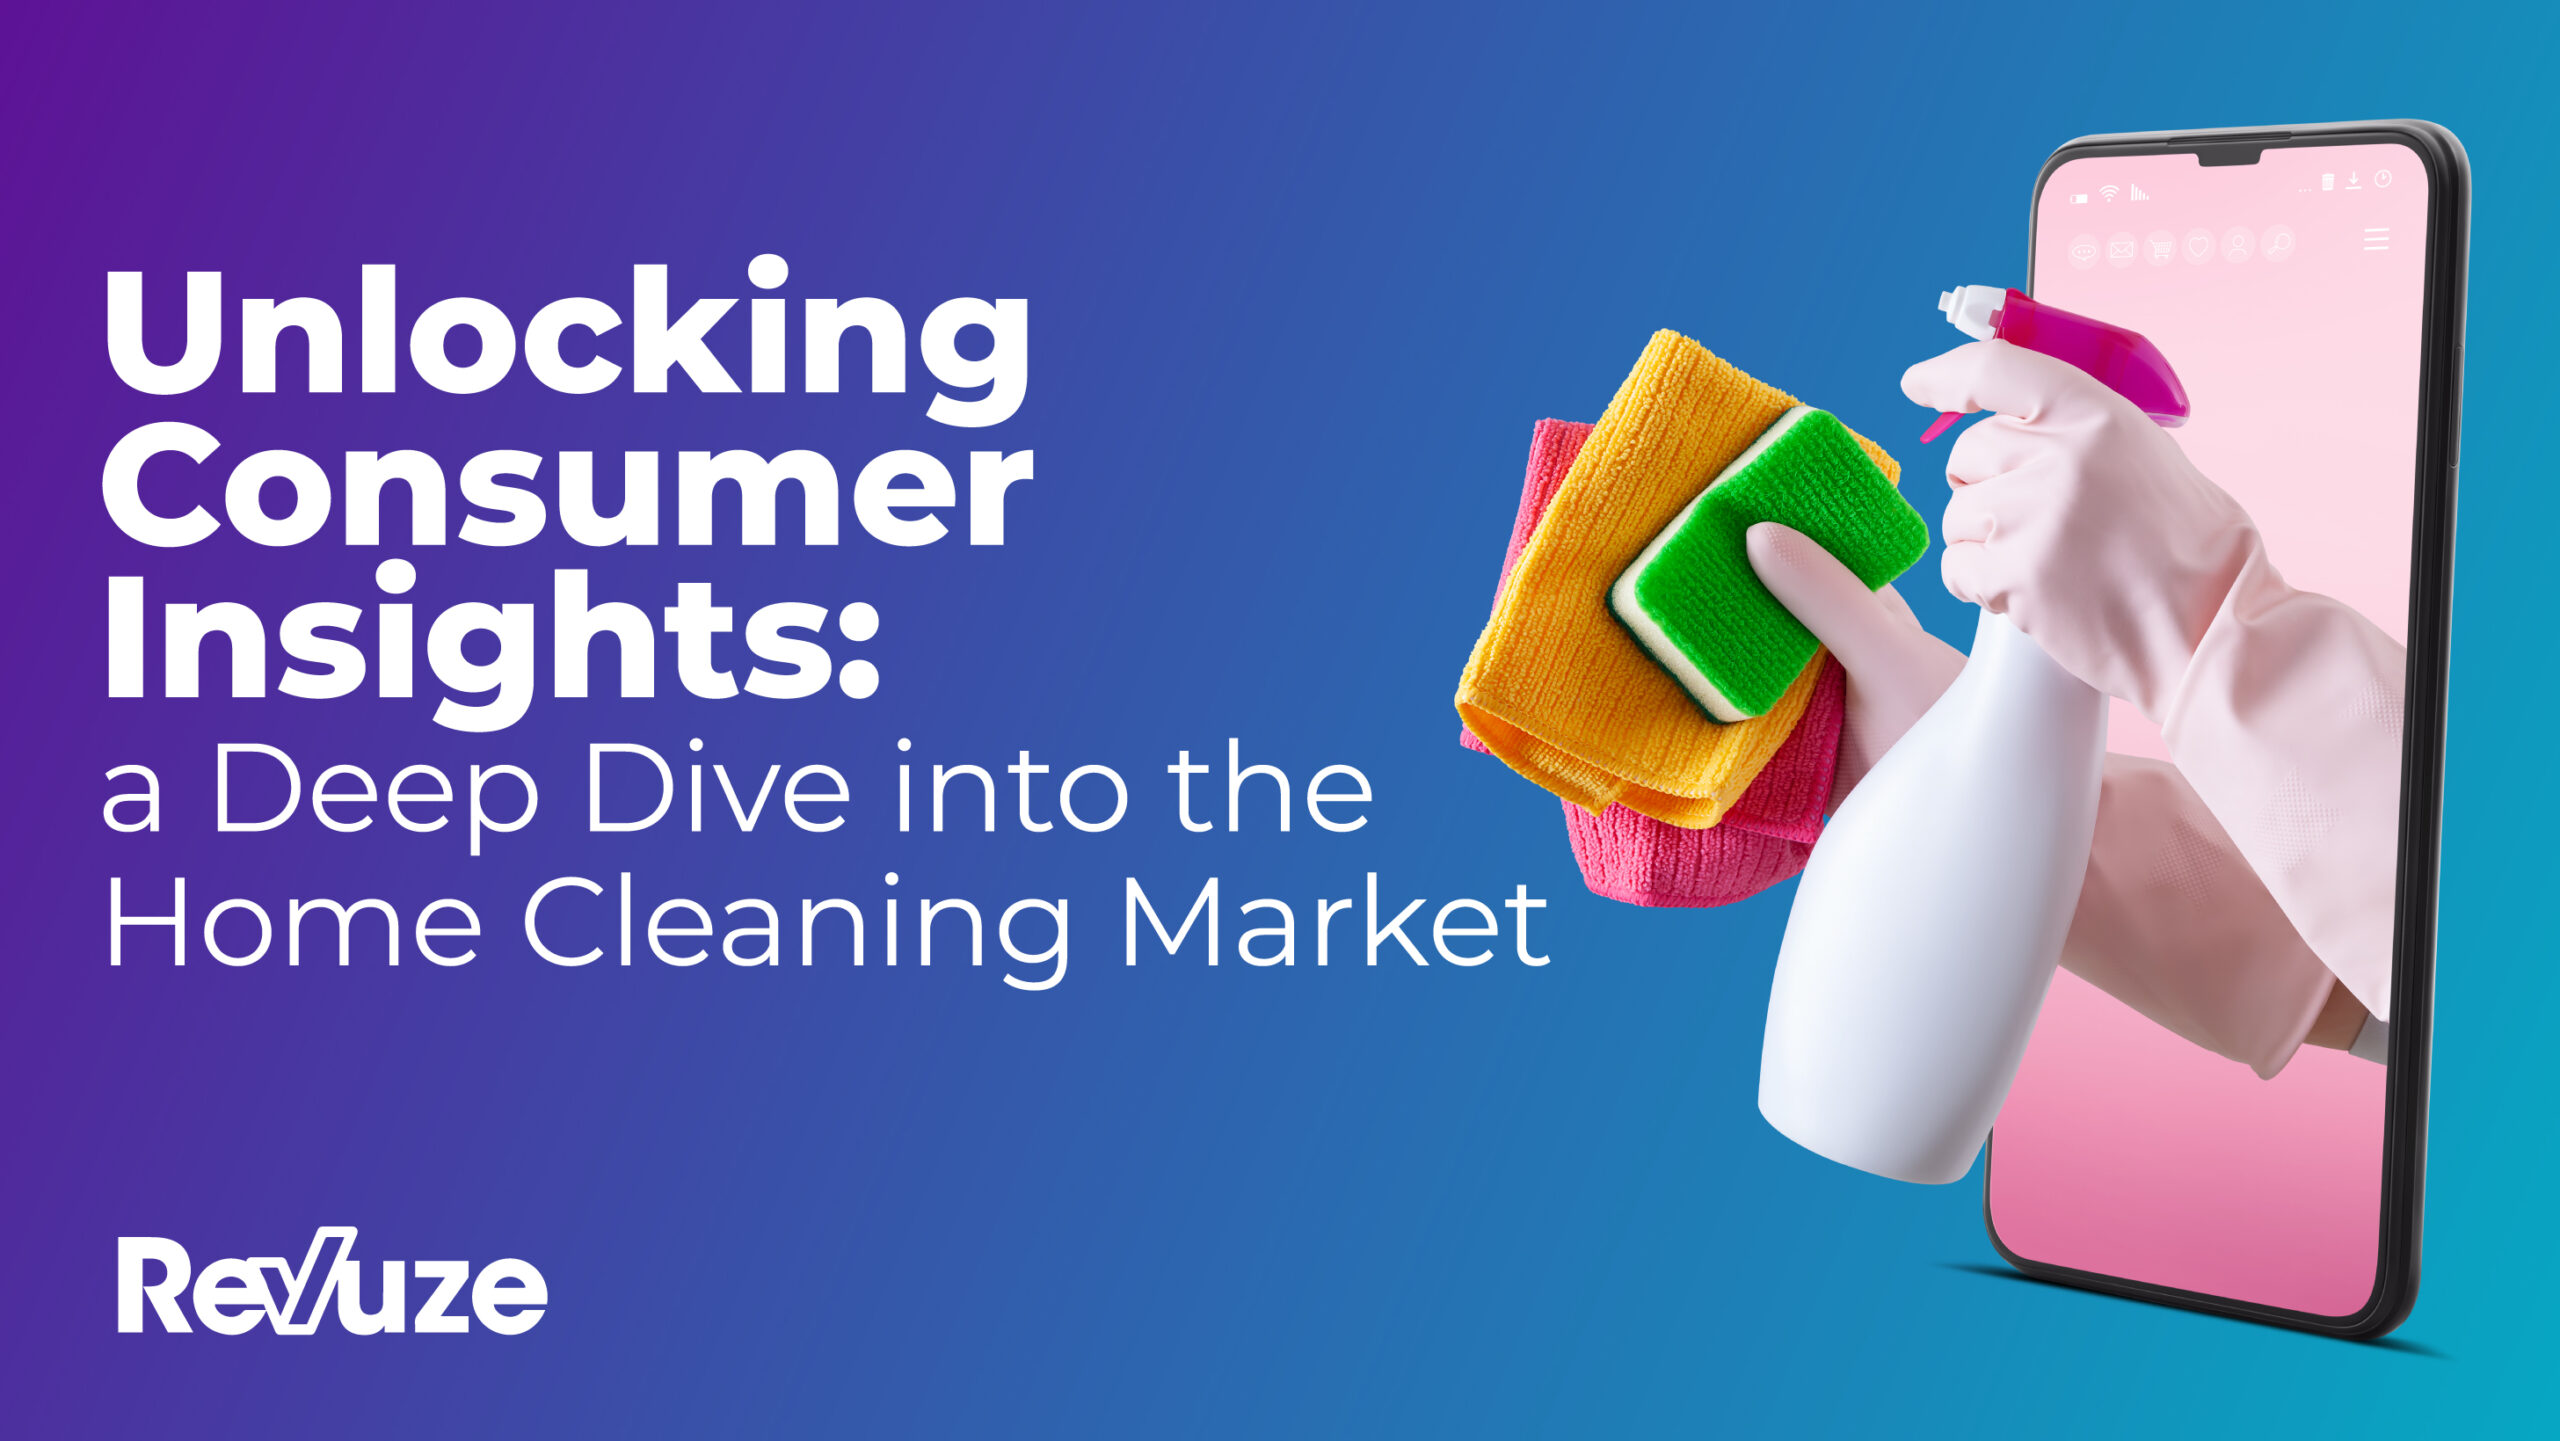 Unlocking consumer insights: a deep dive into the home cleaning market